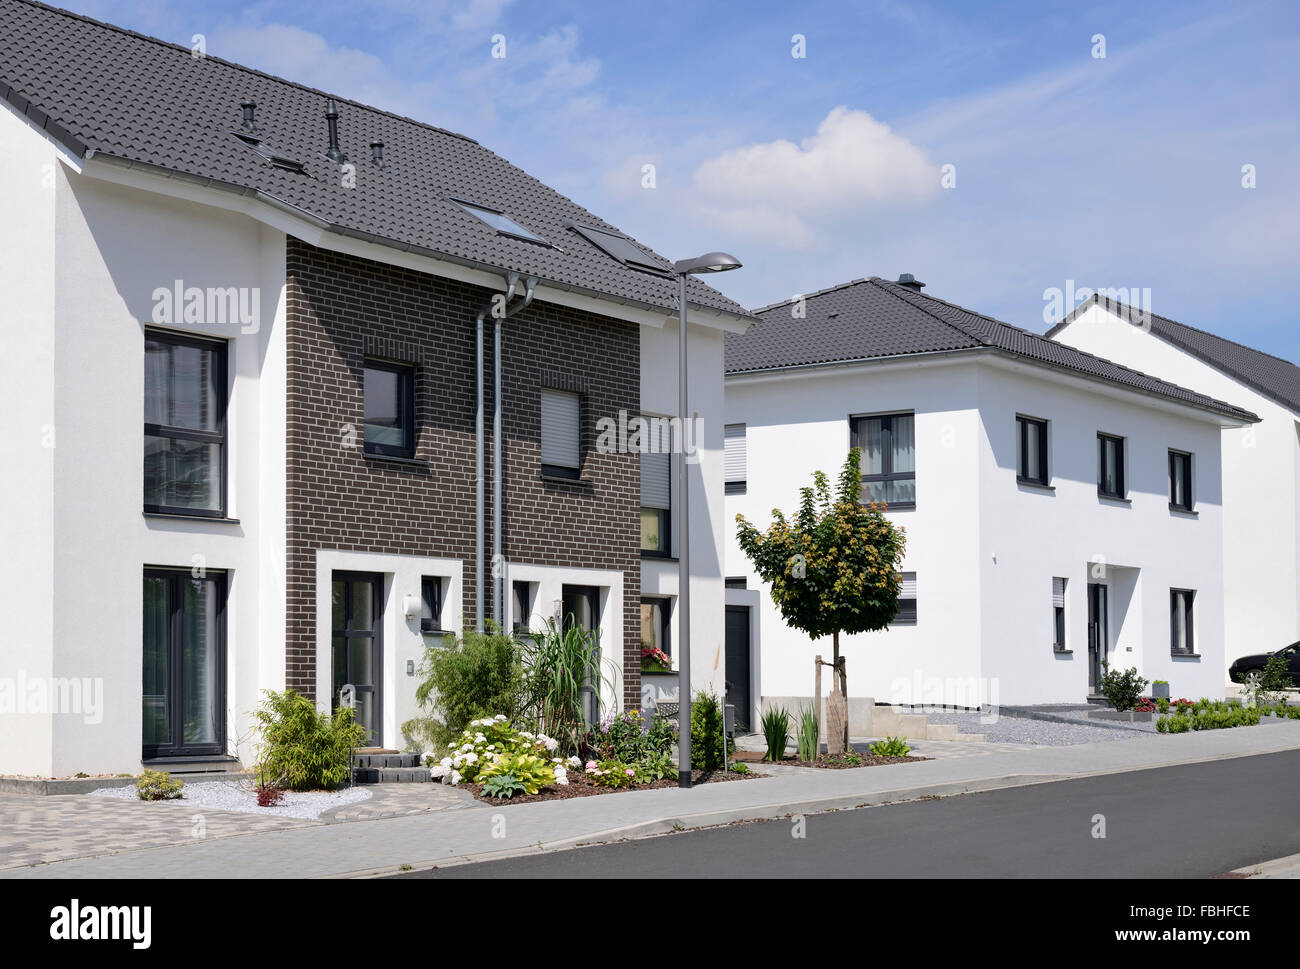 Houses of a new building settlement, Germany, North Rhine-Westphalia, Grevenbroich Stock Photo